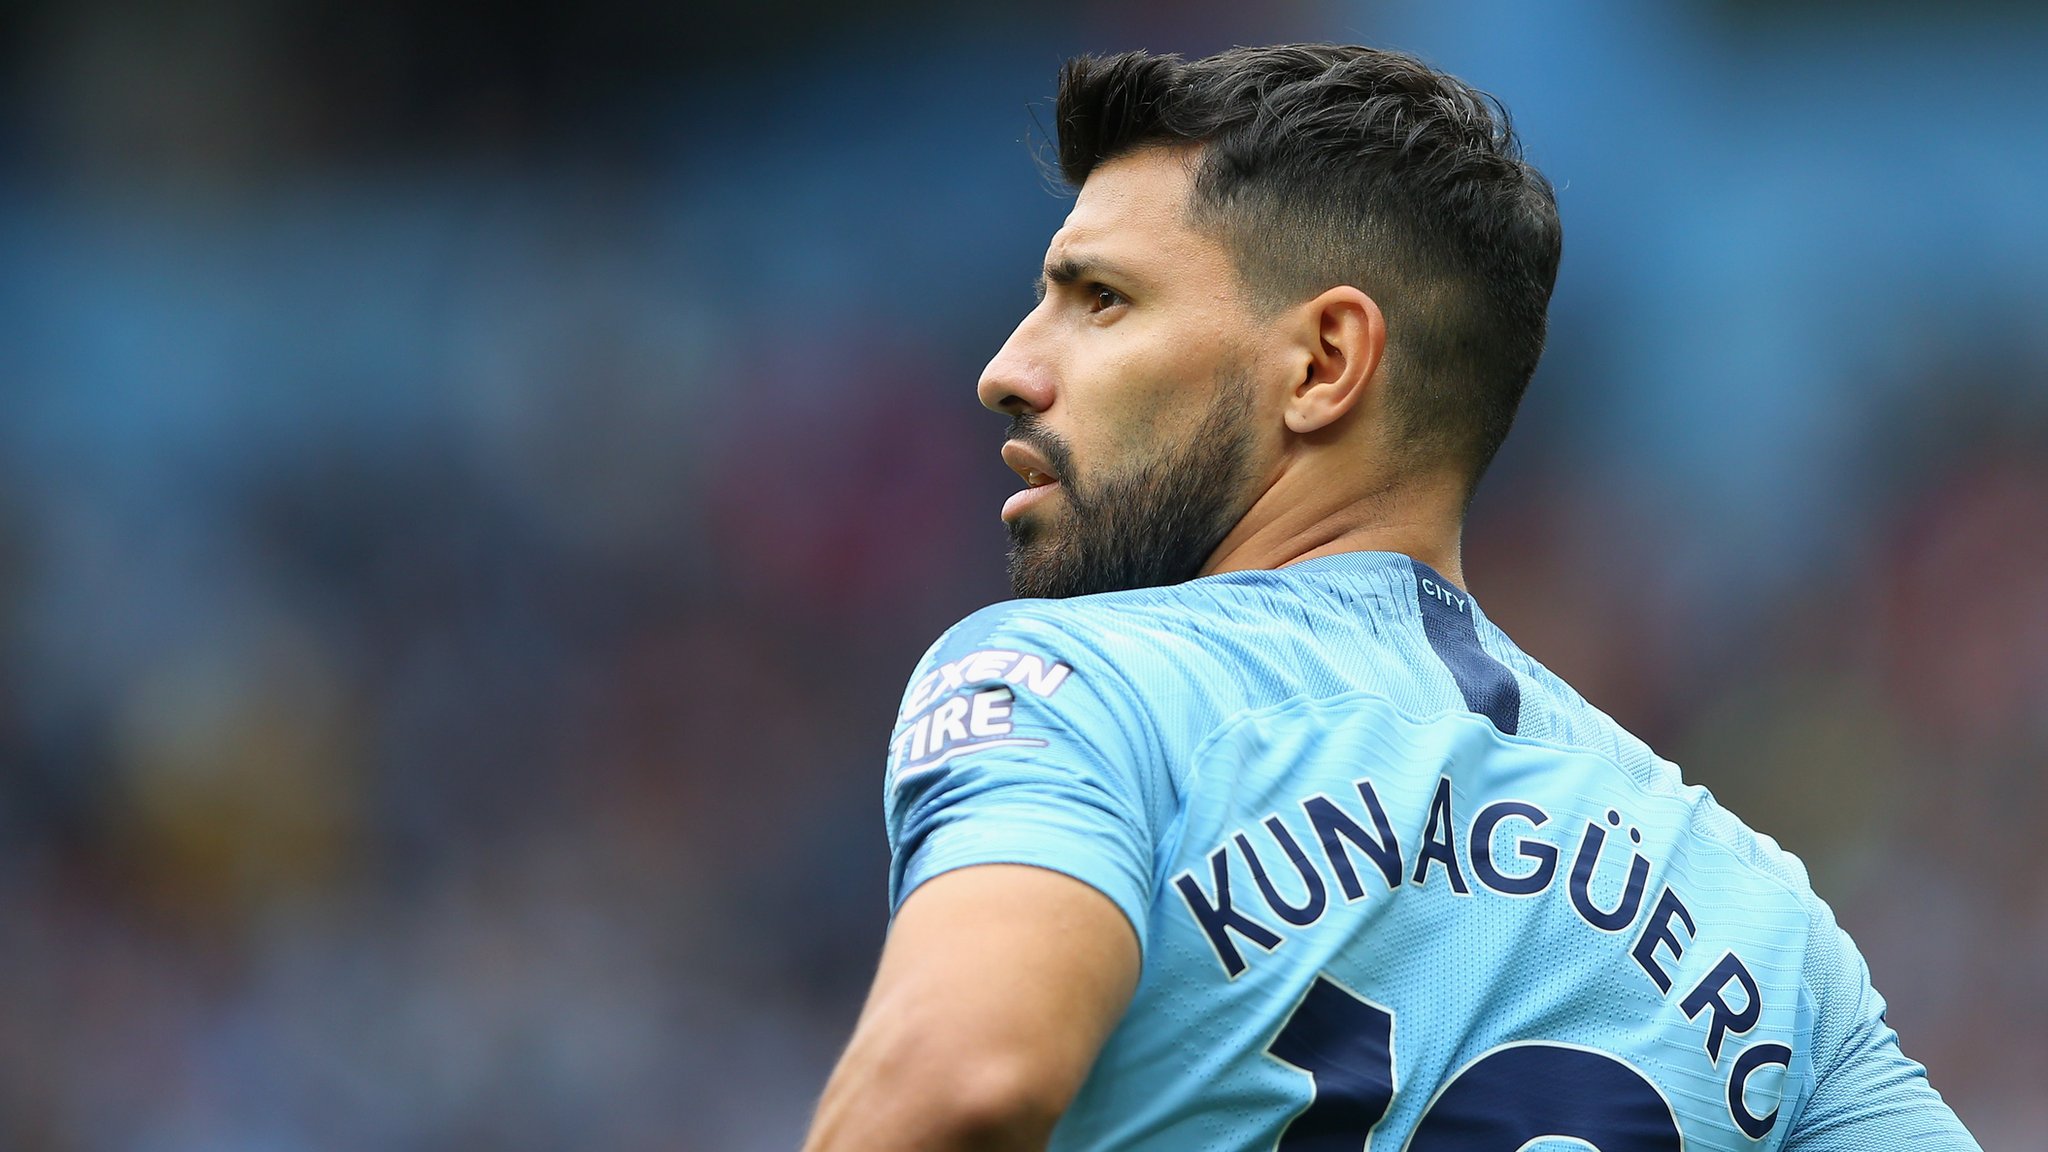 Man City forward Sergio Aguero fit to face Lyon in Champions League opener